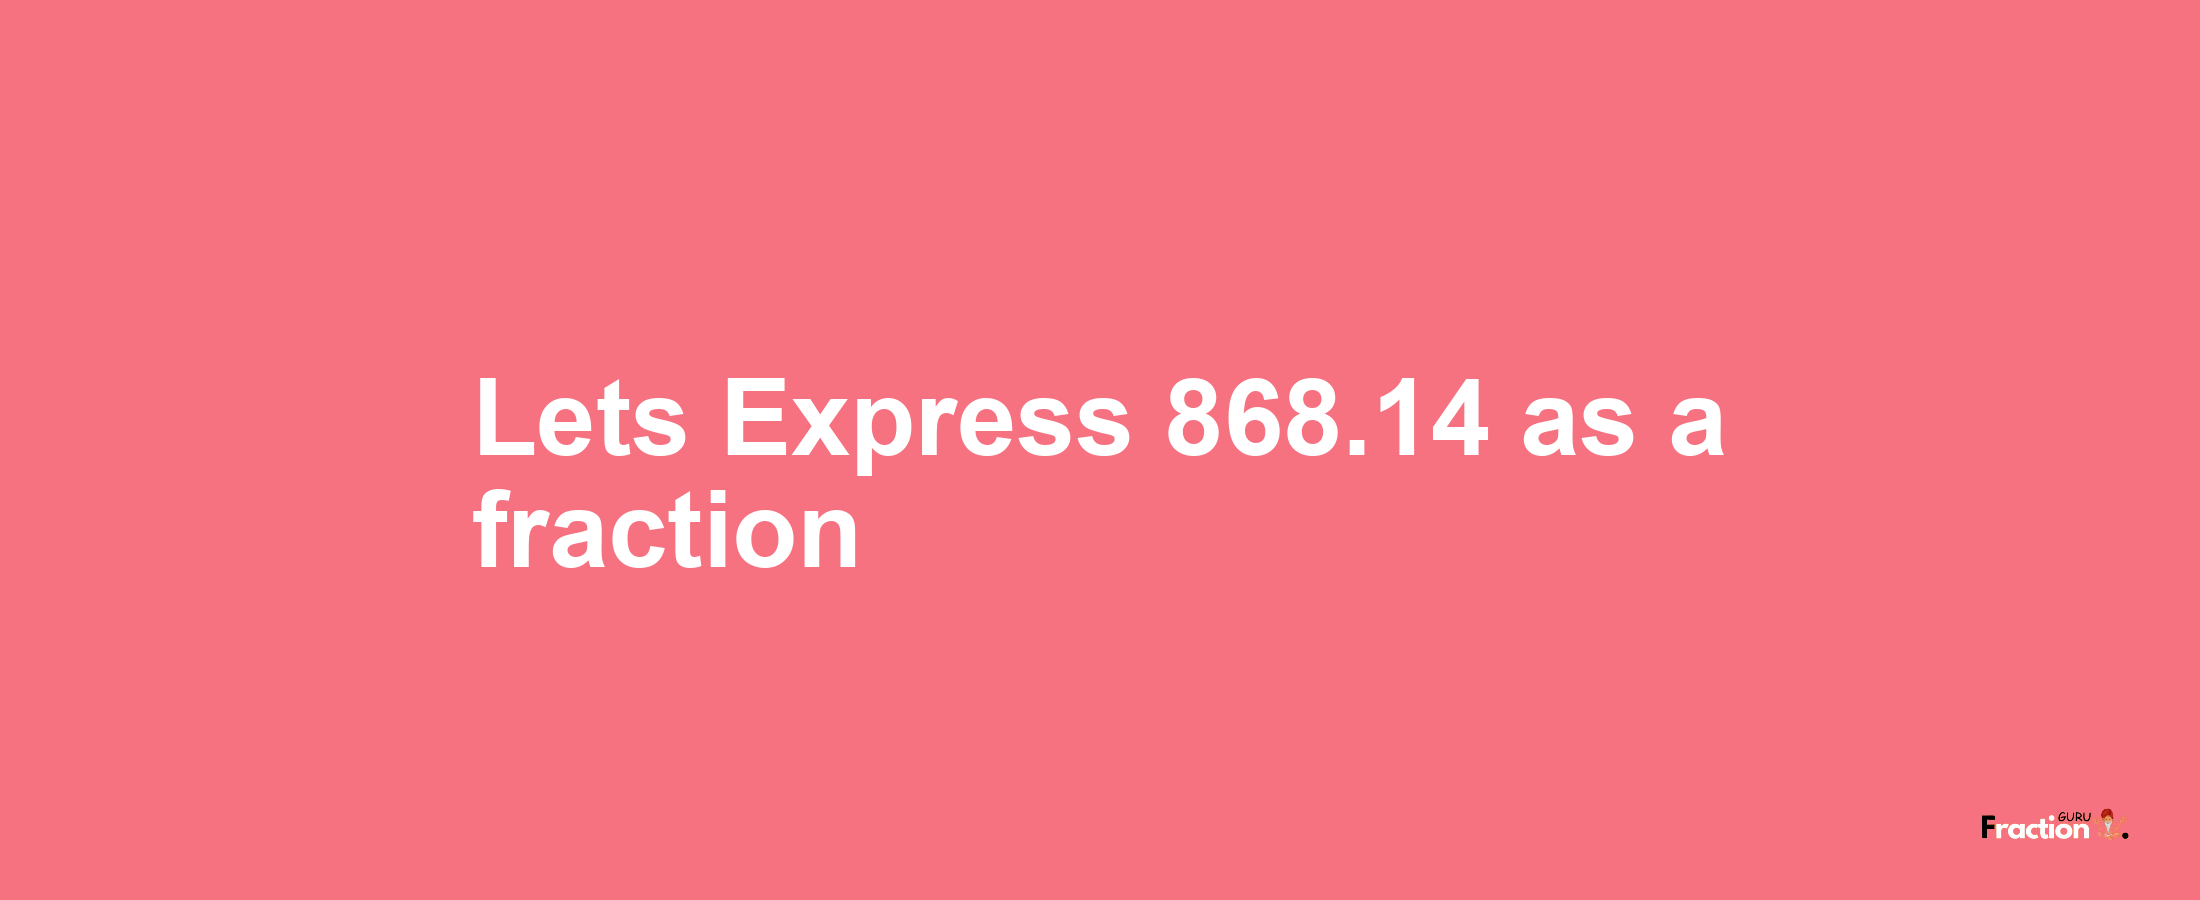 Lets Express 868.14 as afraction